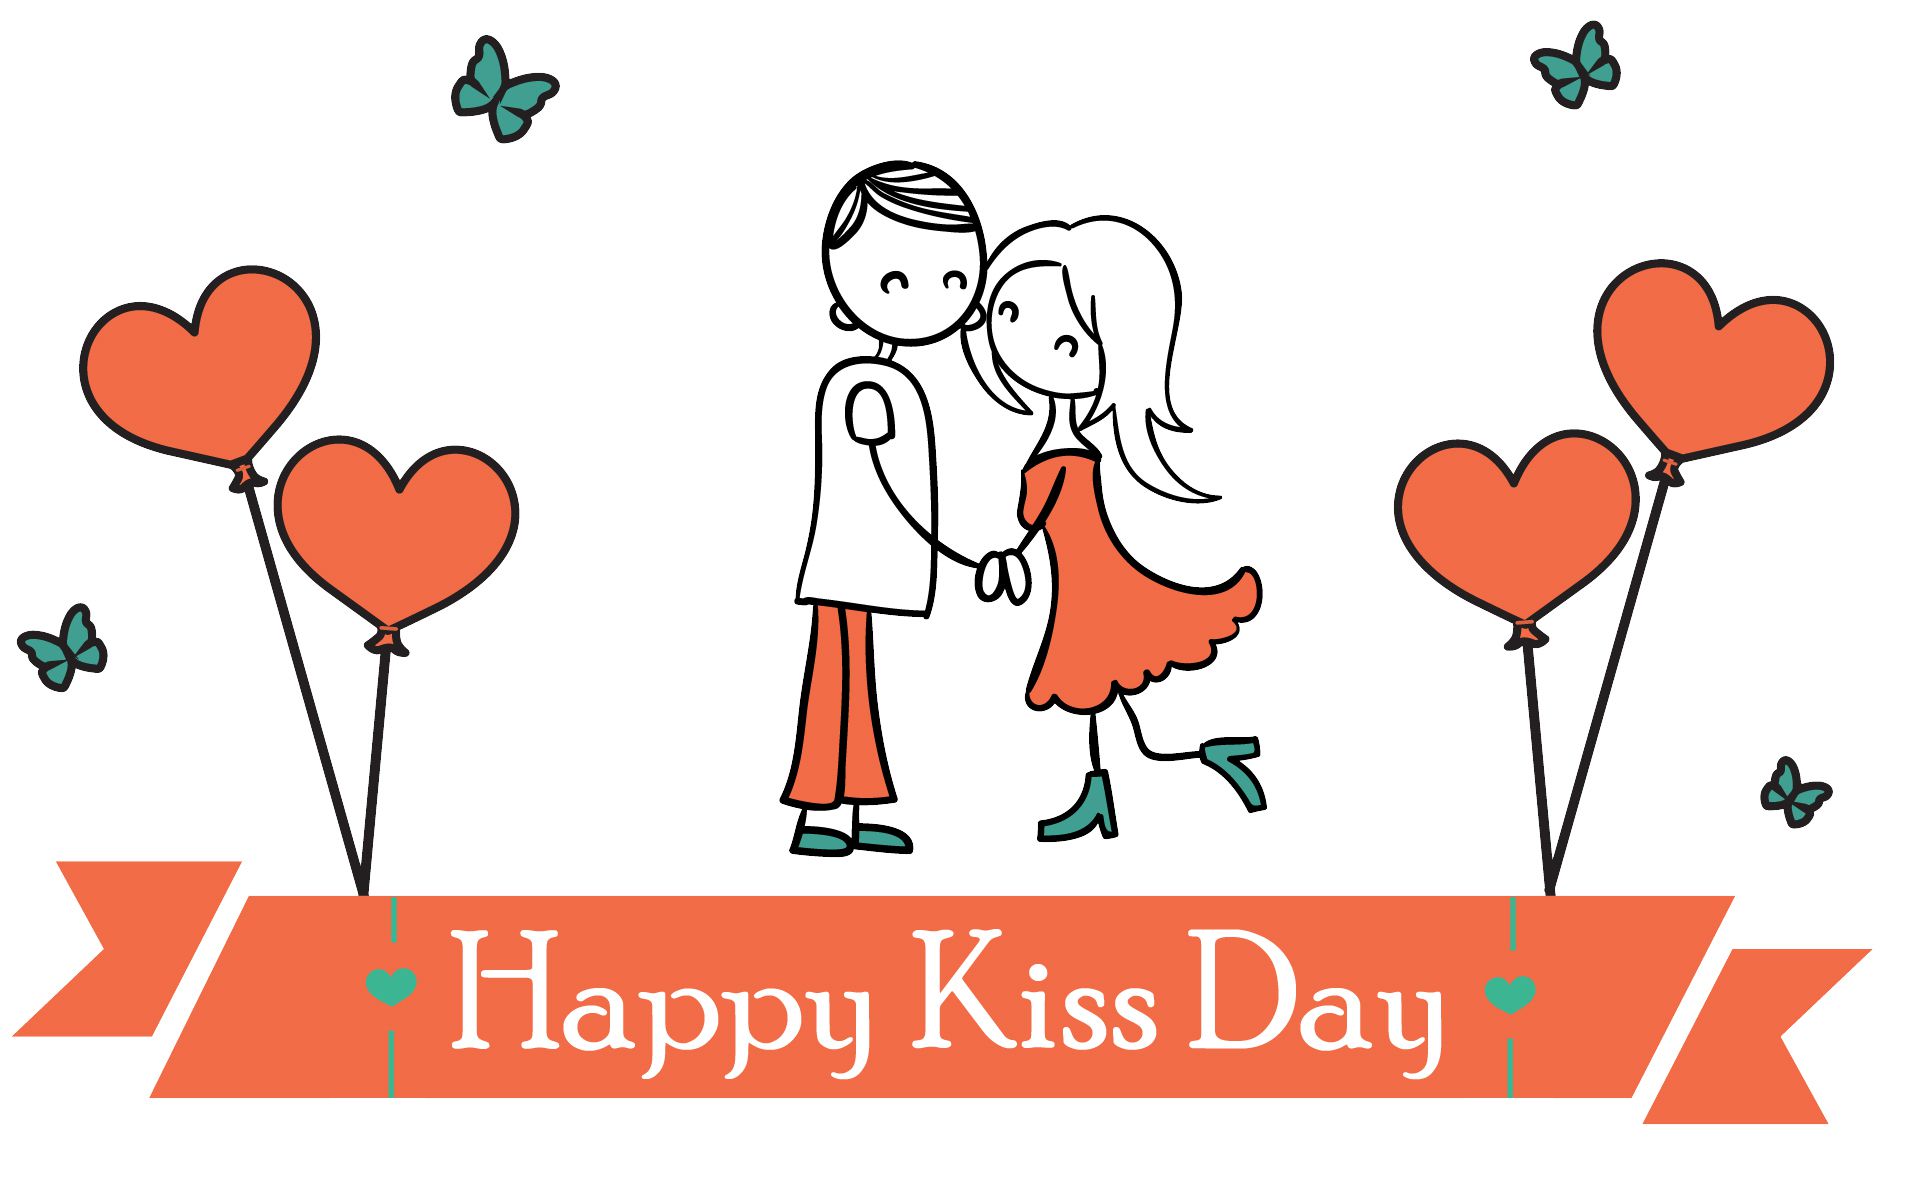 Download Kiss Wallpaper, Kiss Day E-greetings, Friendship - Happy Kiss Day Wishes - HD Wallpaper 